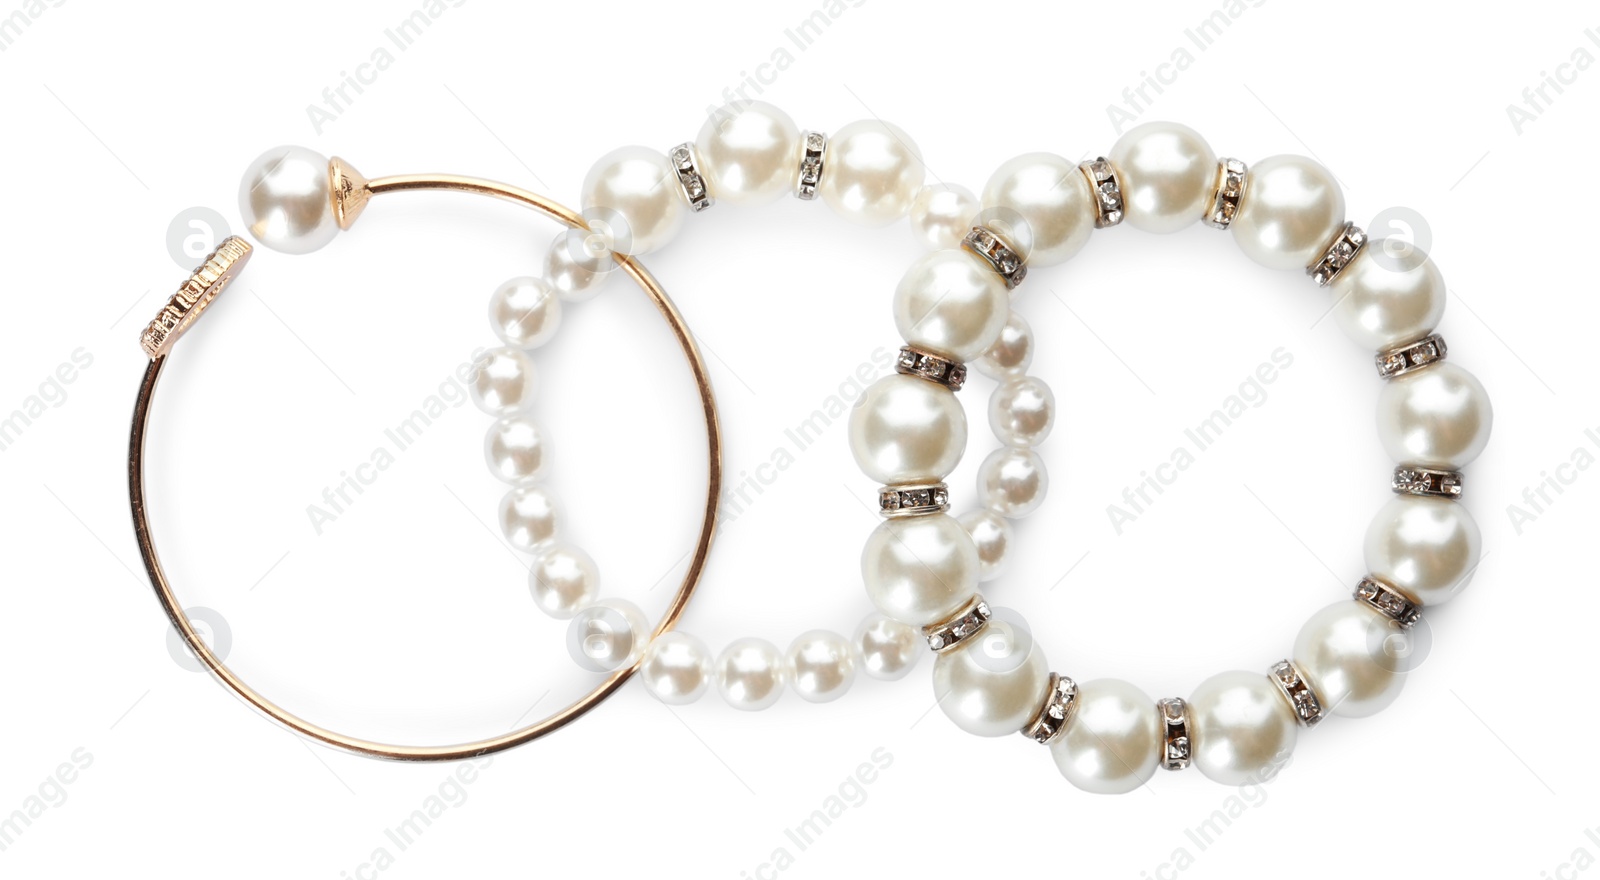 Photo of Different elegant bracelets with pearls on white background, top view